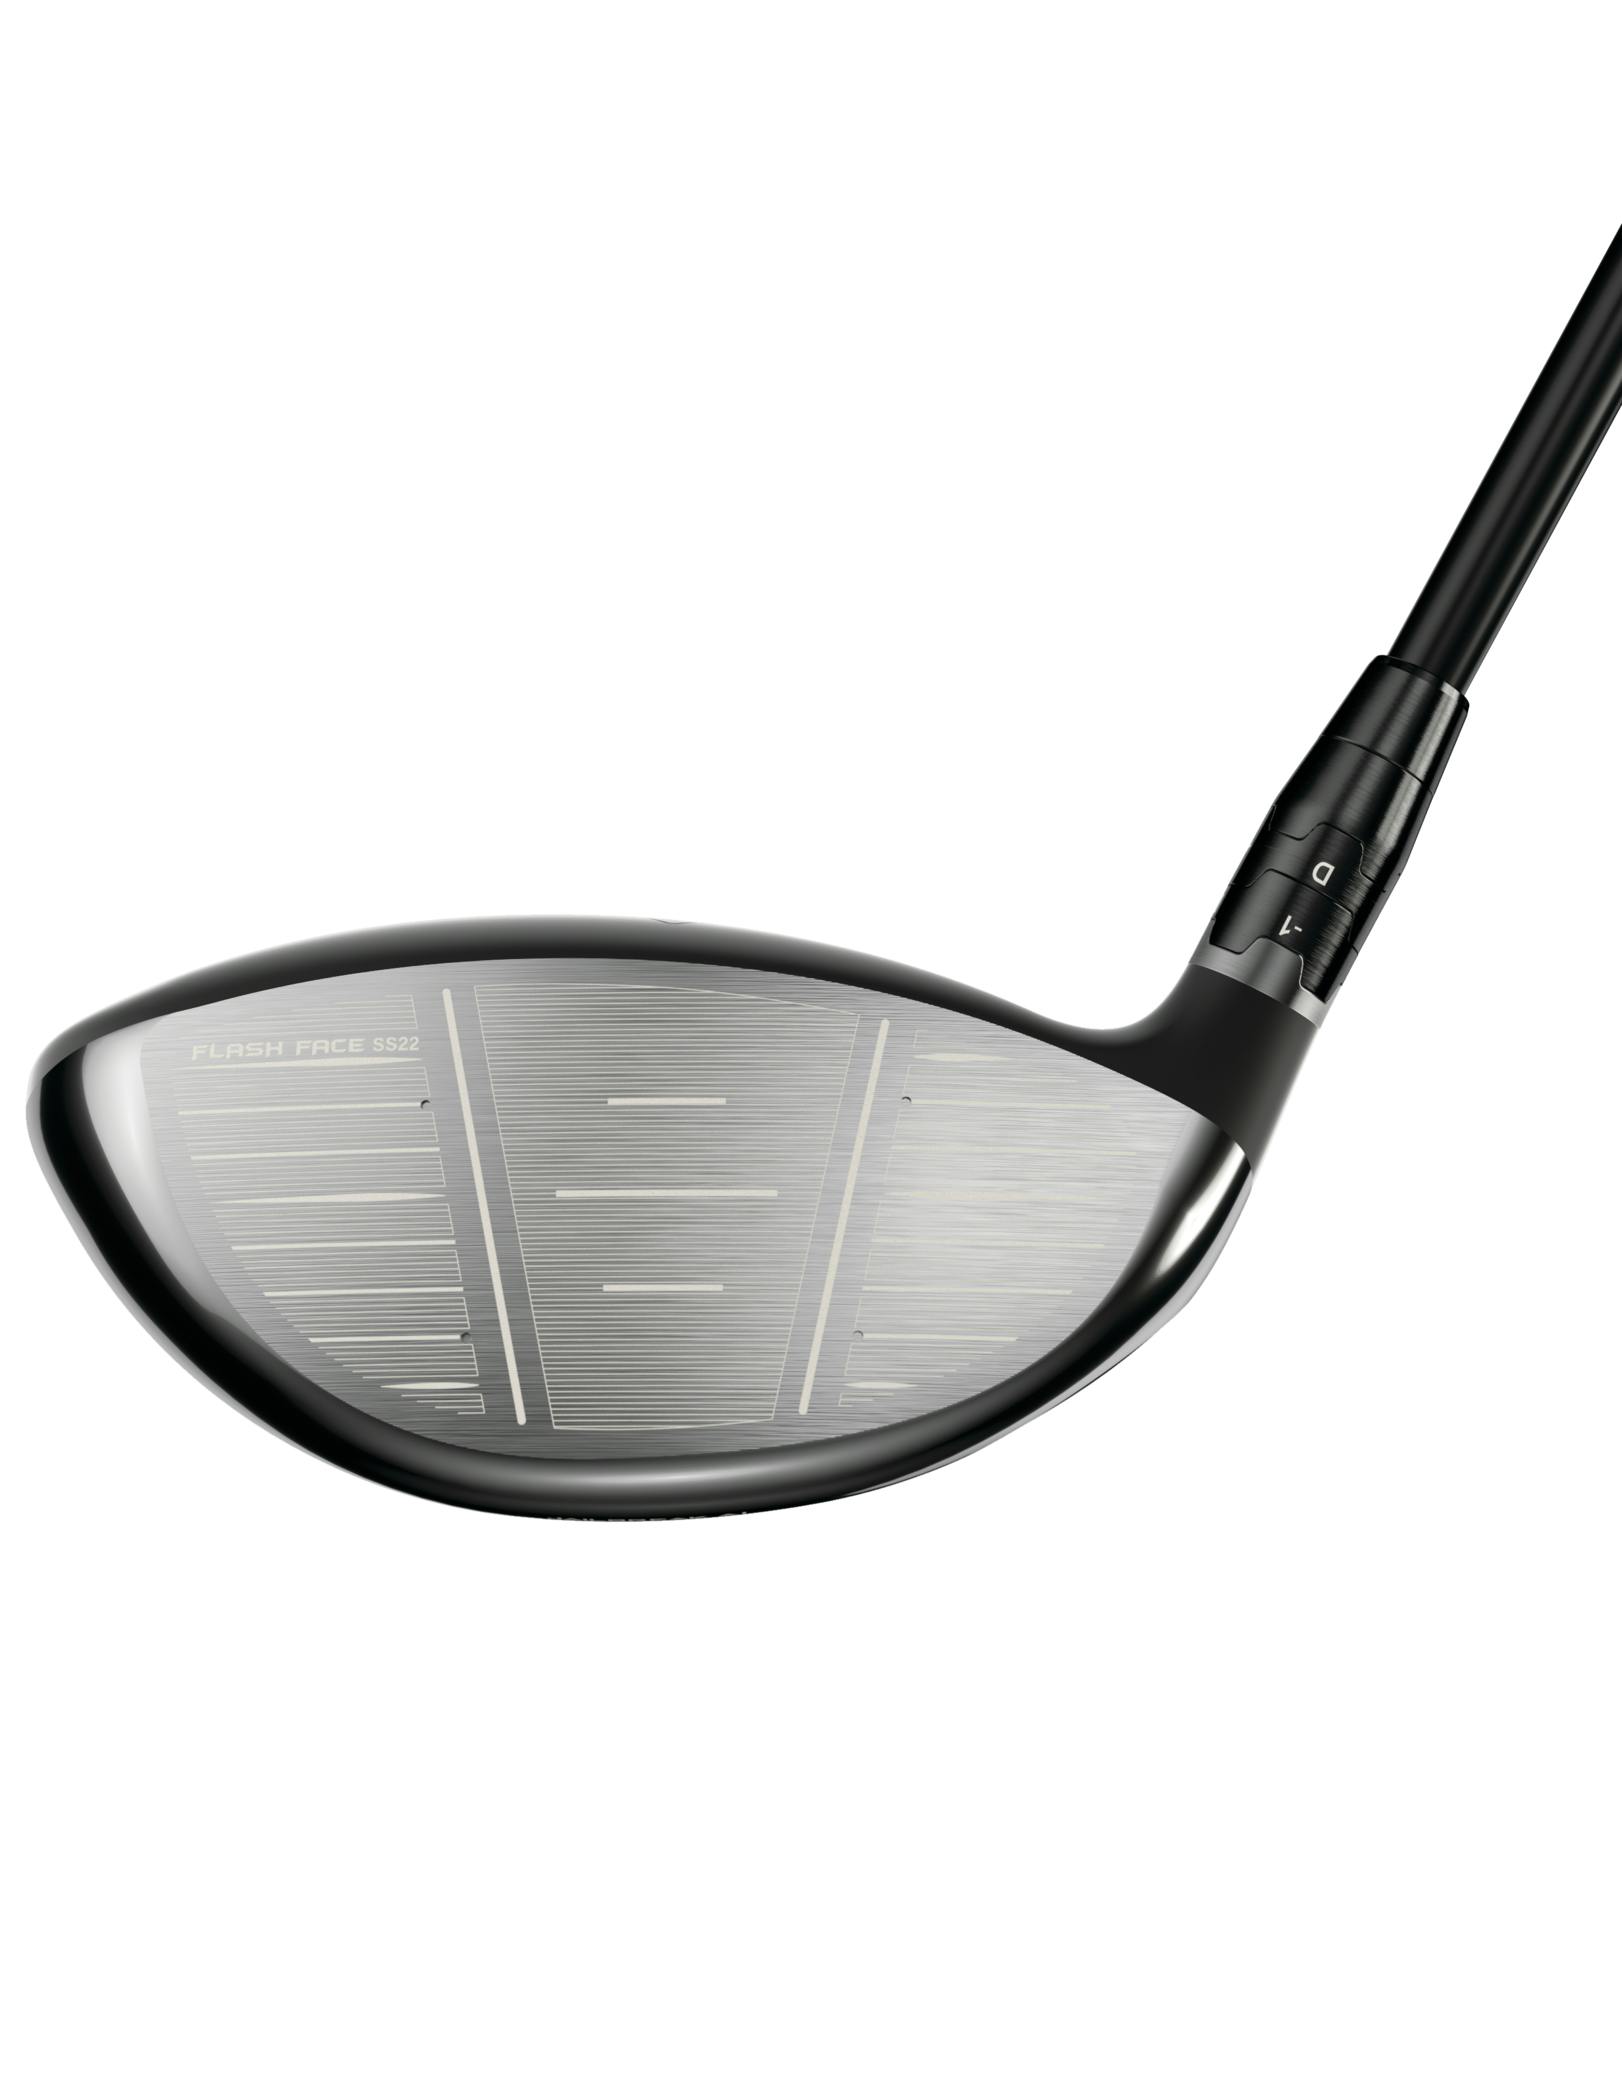 Callaway Rogue ST Max Driver · Right handed · Extra Stiff · 9°